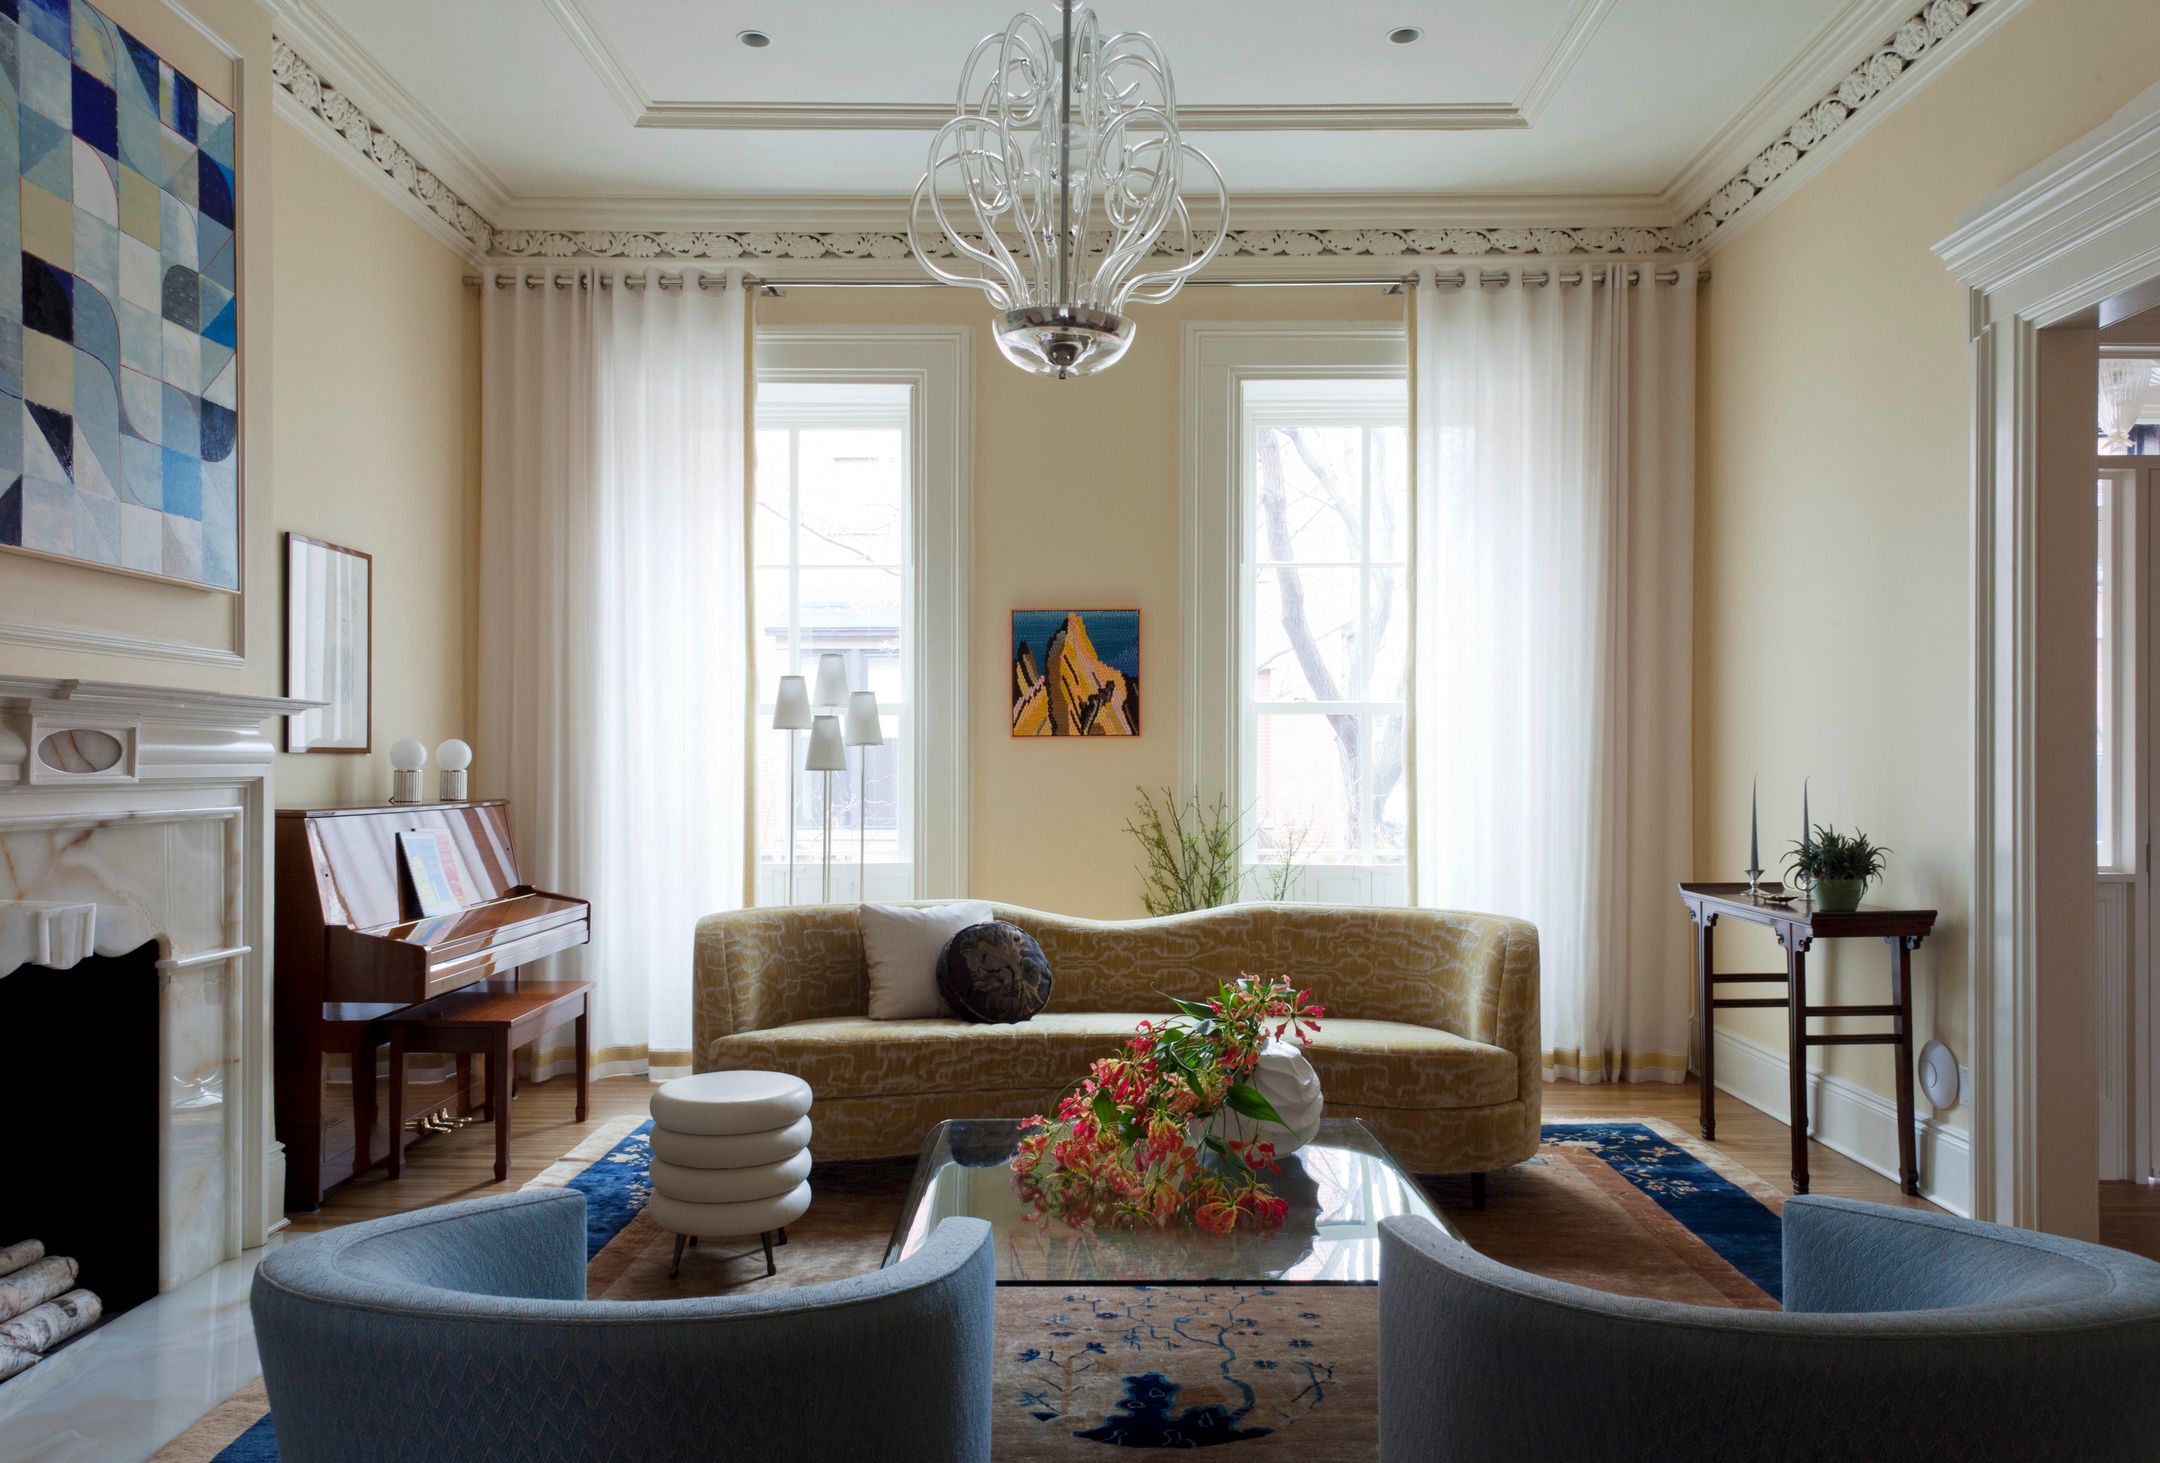  Brooklyn Heights Gothic Revival Parlor